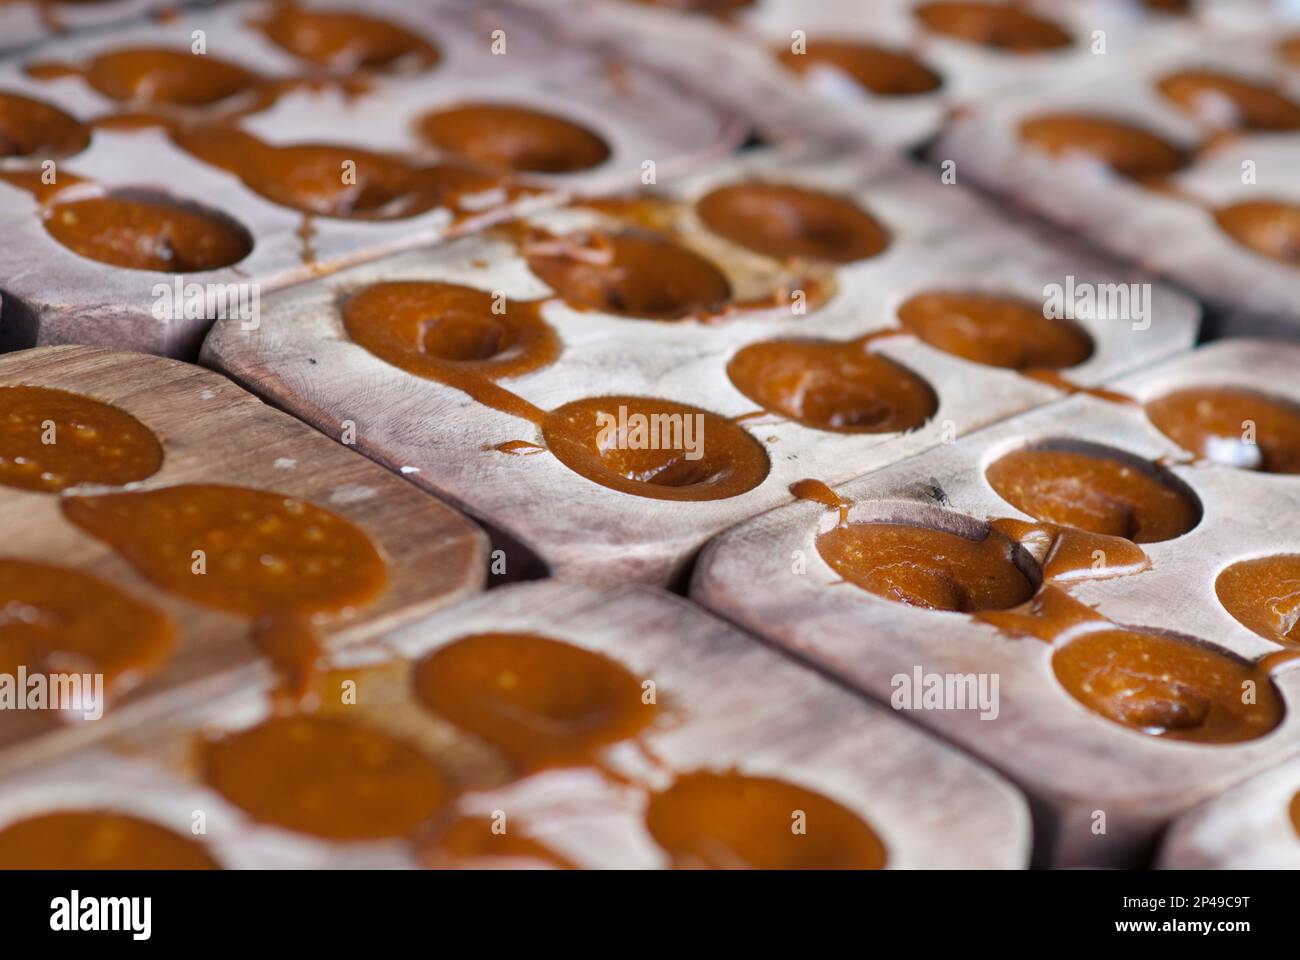 Palm sugar in wooden trays, Palm sugar factory, near Sukamade, East Java, Indonesia Stock Photo